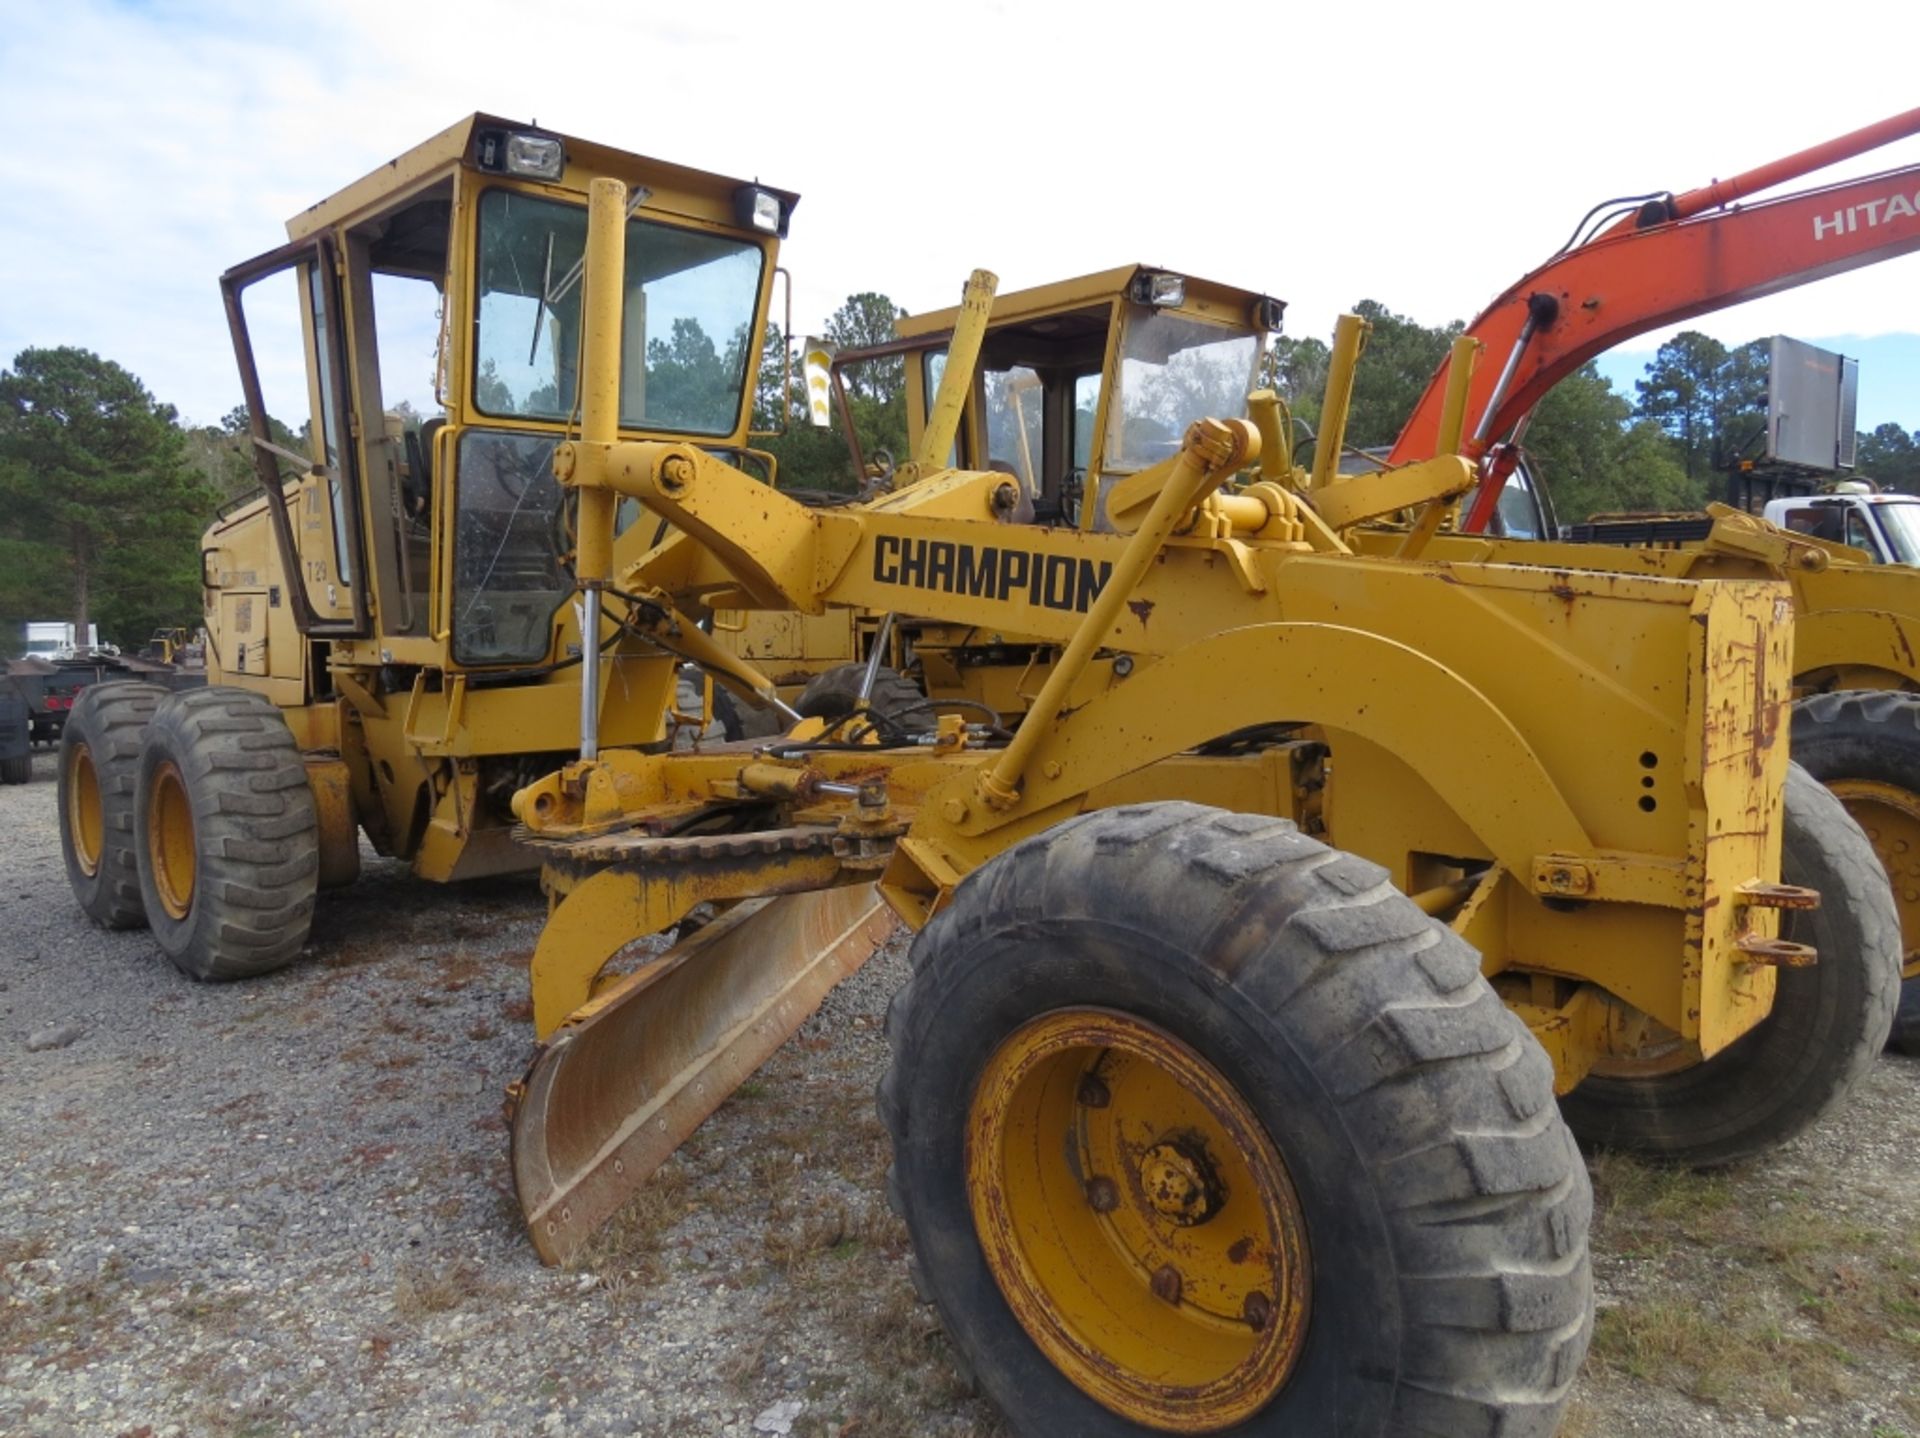 Champion 710A Series 3 Motorgrader 12' Mold Board SCARFIRE 710A-157-1136-21494 5863 hrs showing - Image 2 of 11